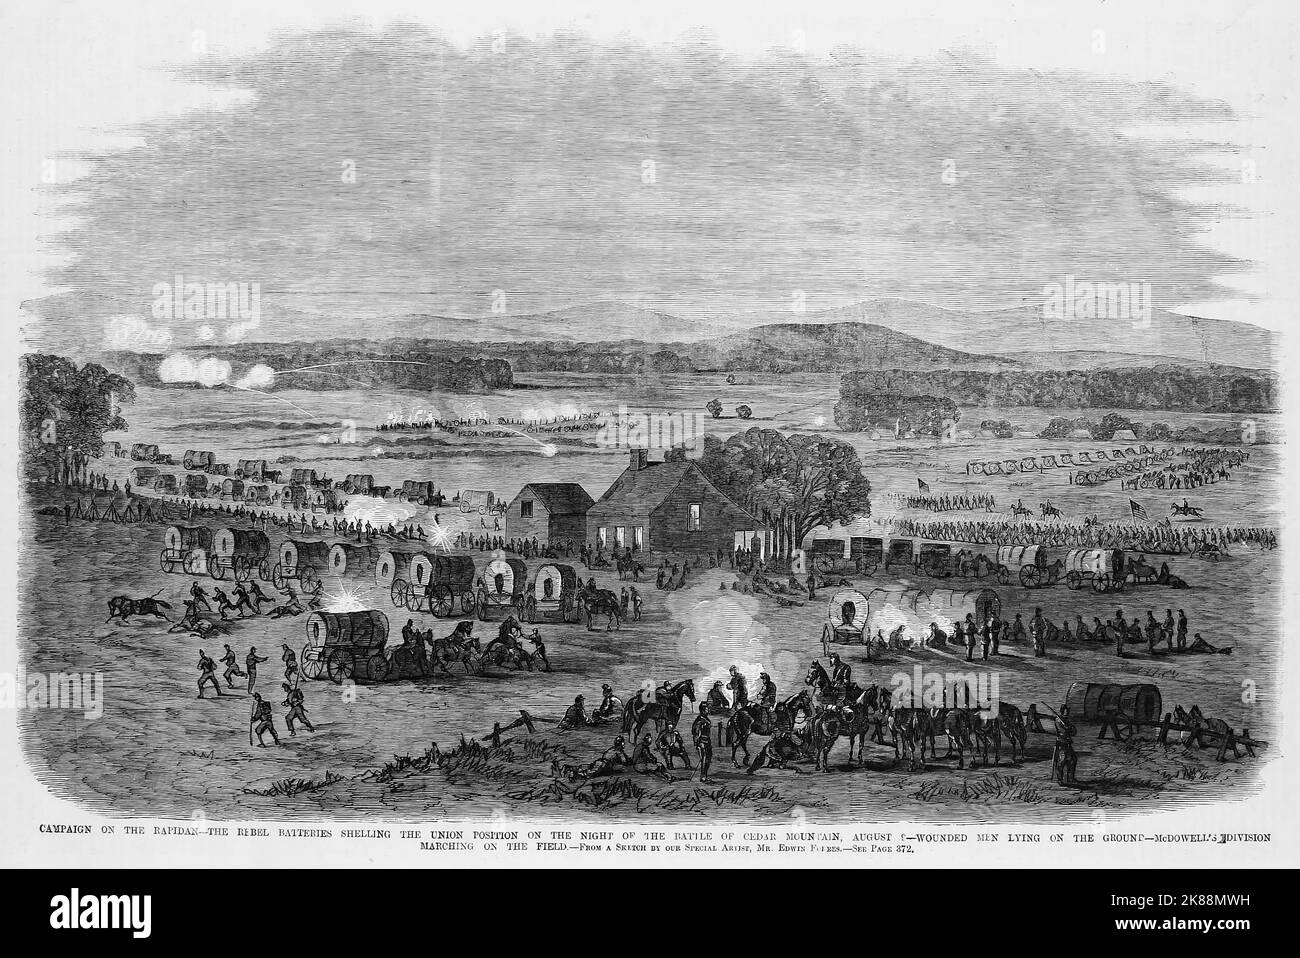 Campaign on the Rapidan - The Rebel batteries shelling the Union position on the night of the Battle of Cedar Mountain, August 9th, 1862 - Wounded men lying on the ground - Irvin McDowell's division marching on the field. 19th century American Civil War illustration from Frank Leslie's Illustrated Newspaper Stock Photo